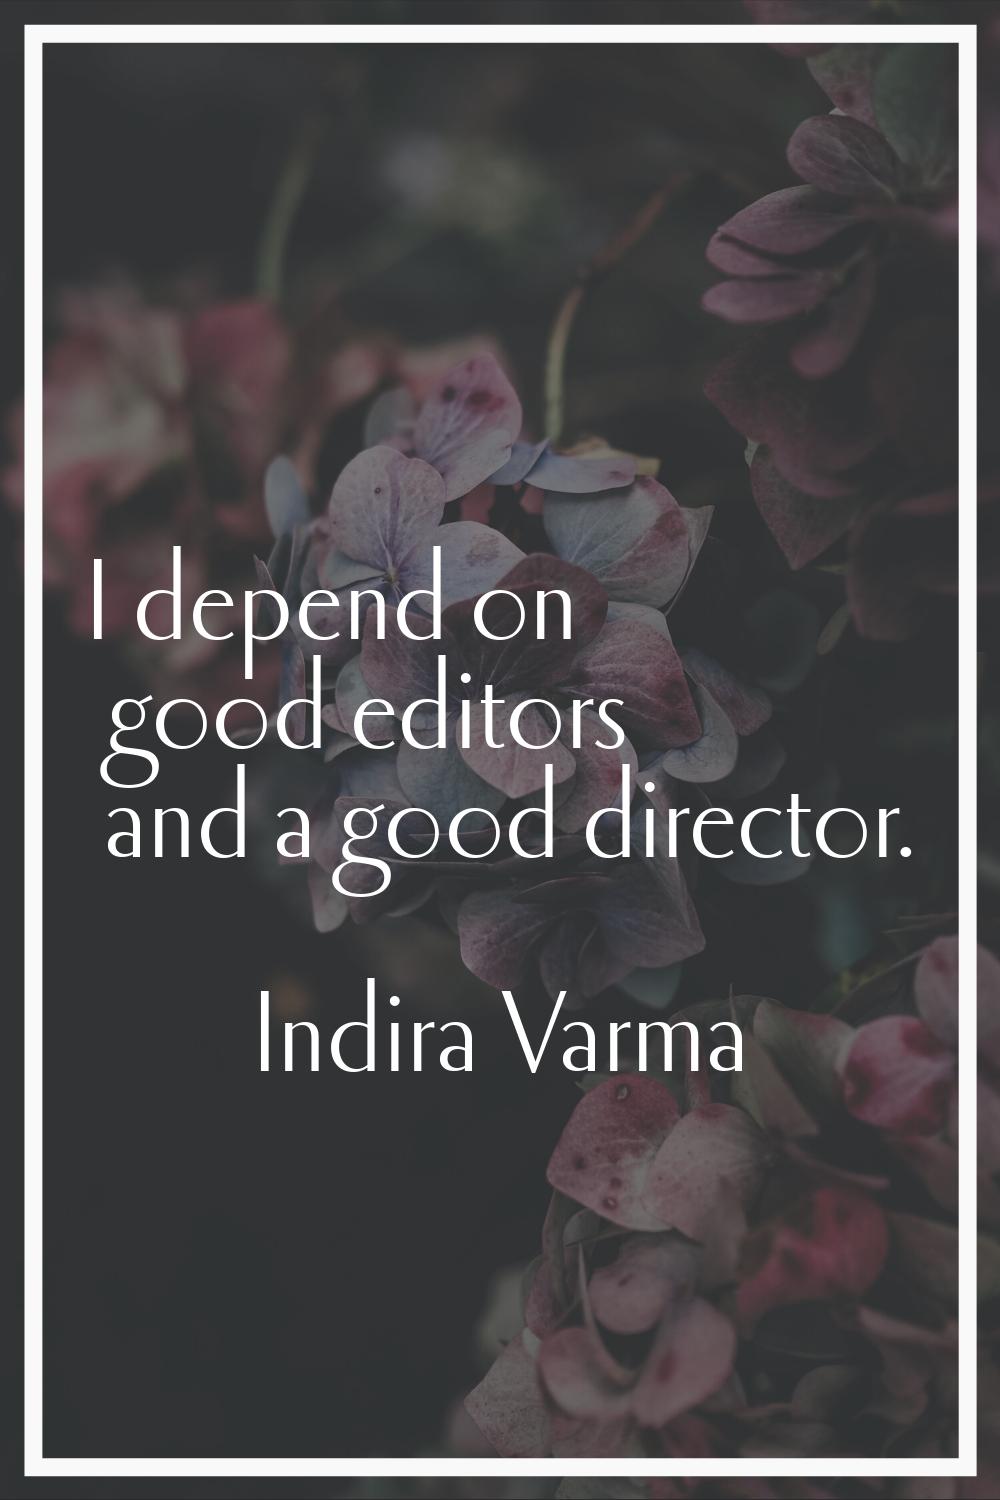 I depend on good editors and a good director.